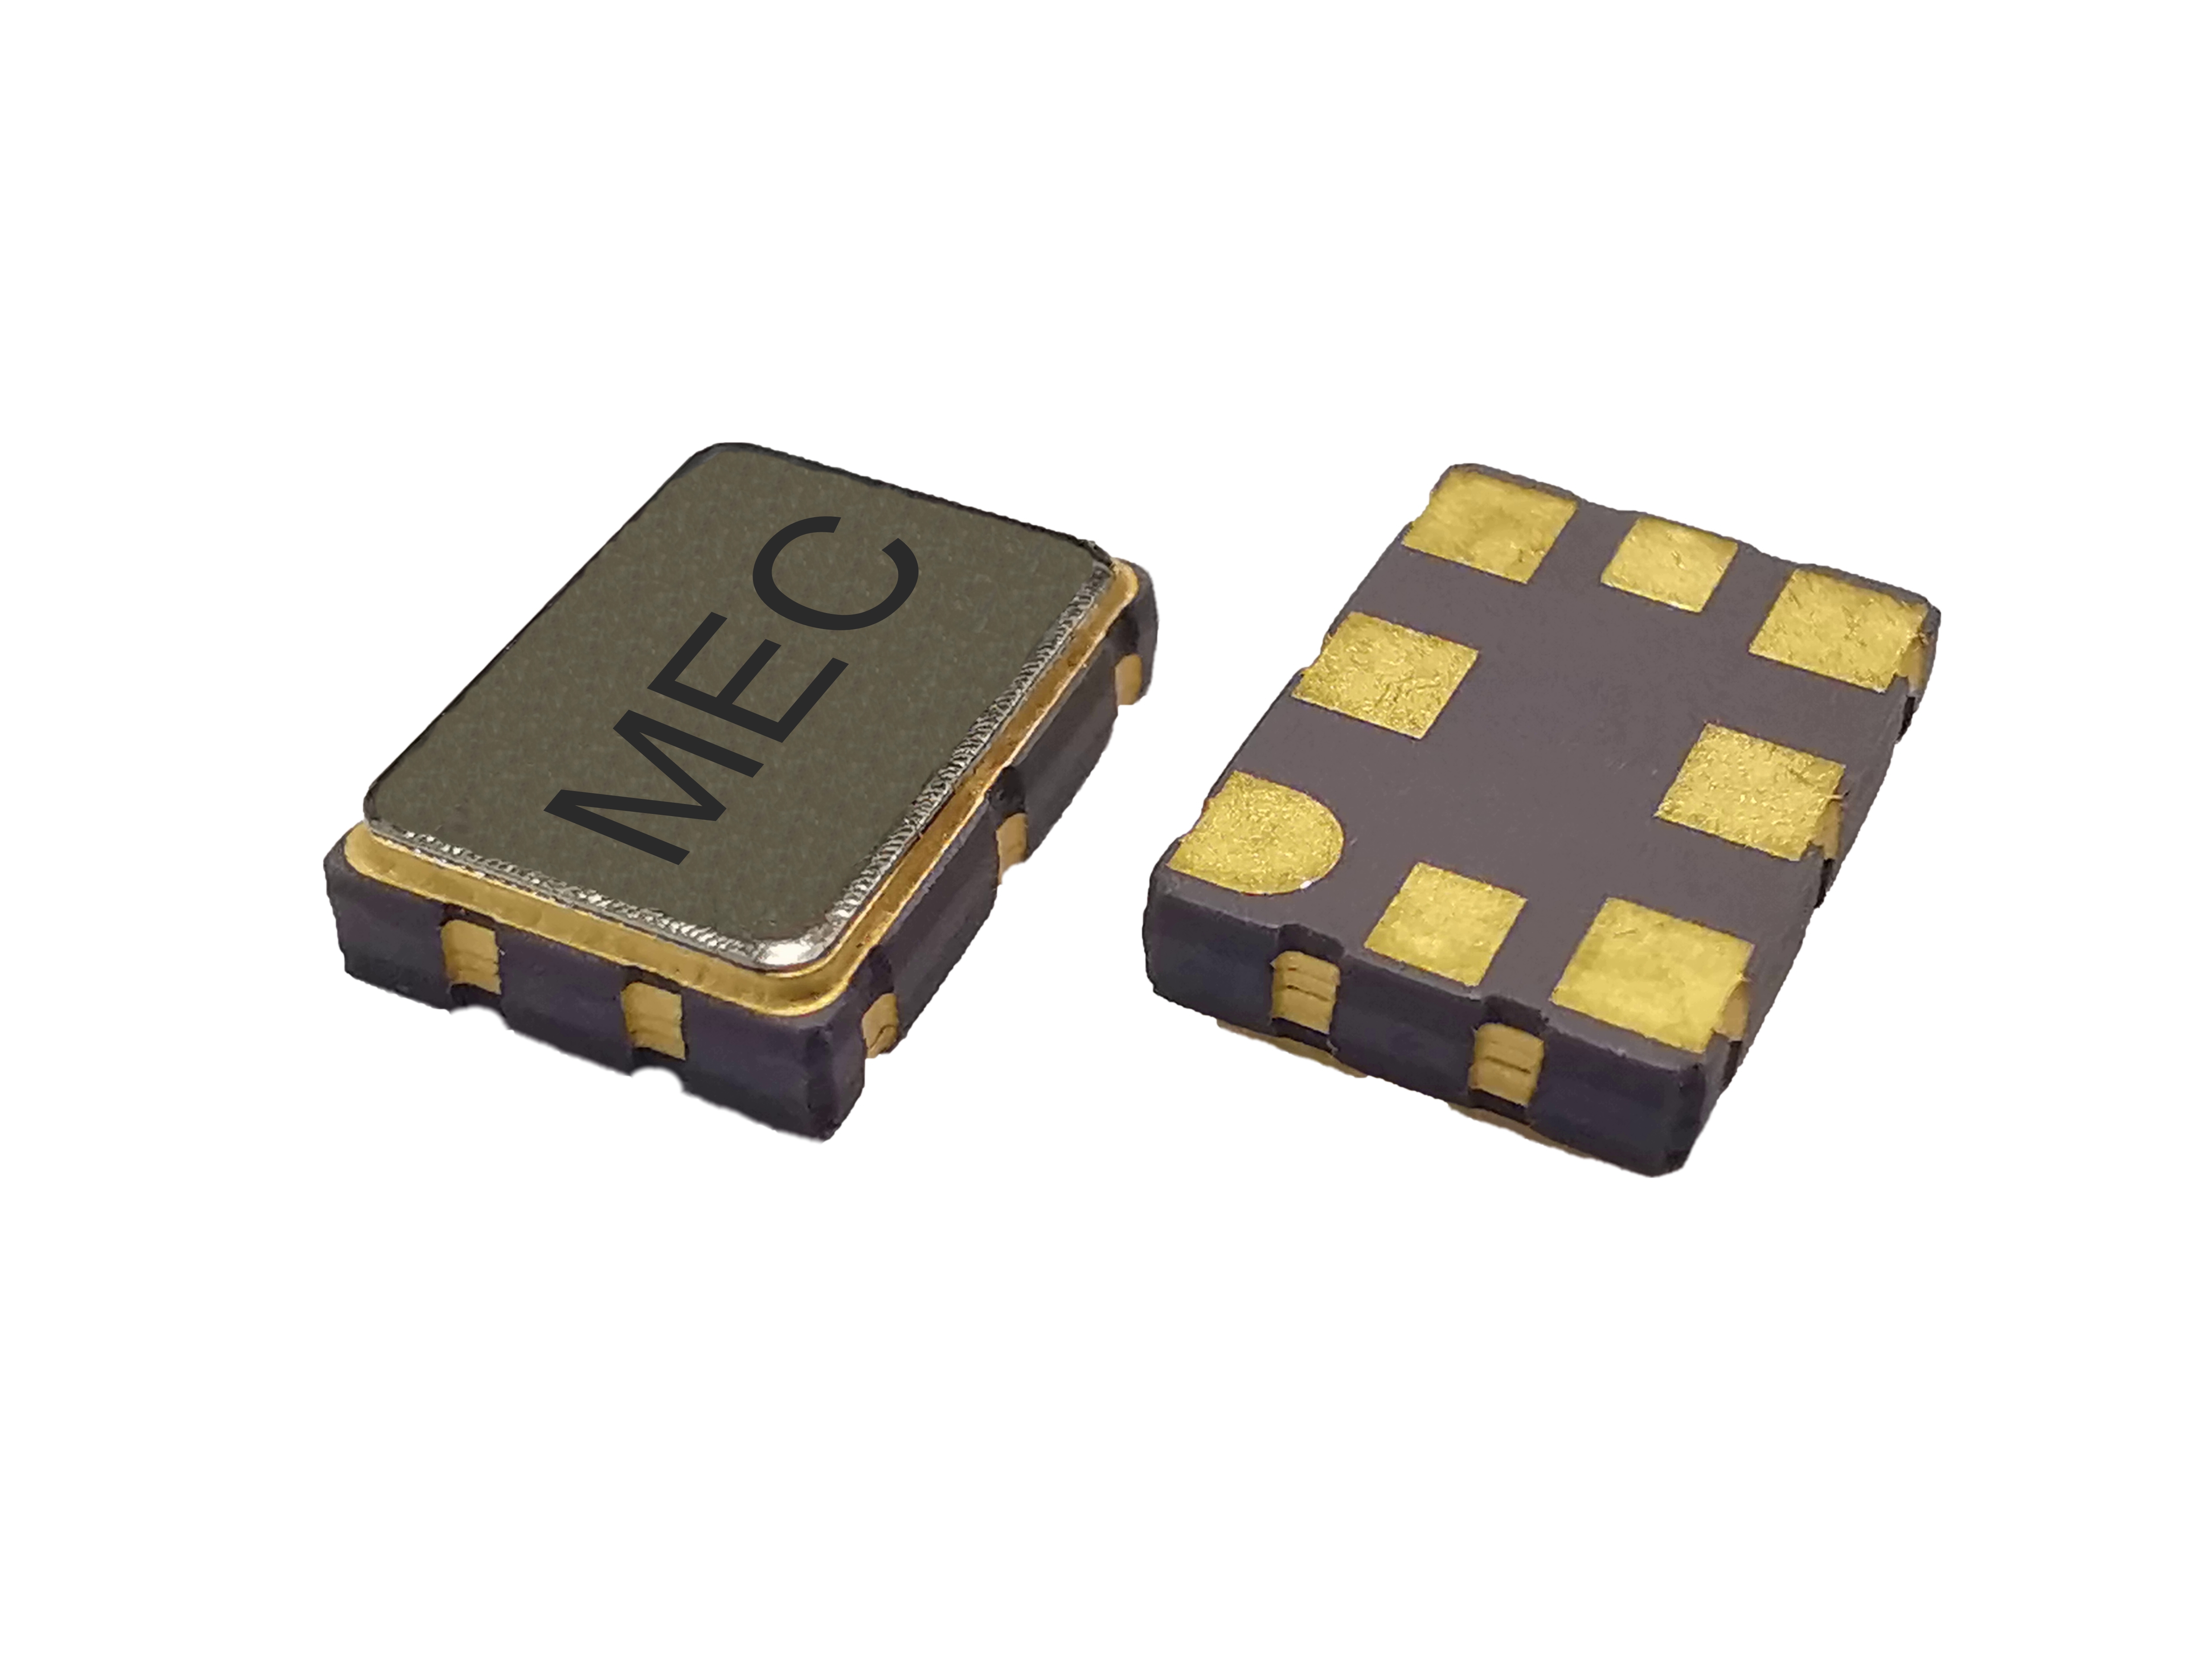 HQJF578 7050 1.8V Ultra Low Jitter Quick-turn Programmable Differential CML SMD Crystal Oscillator